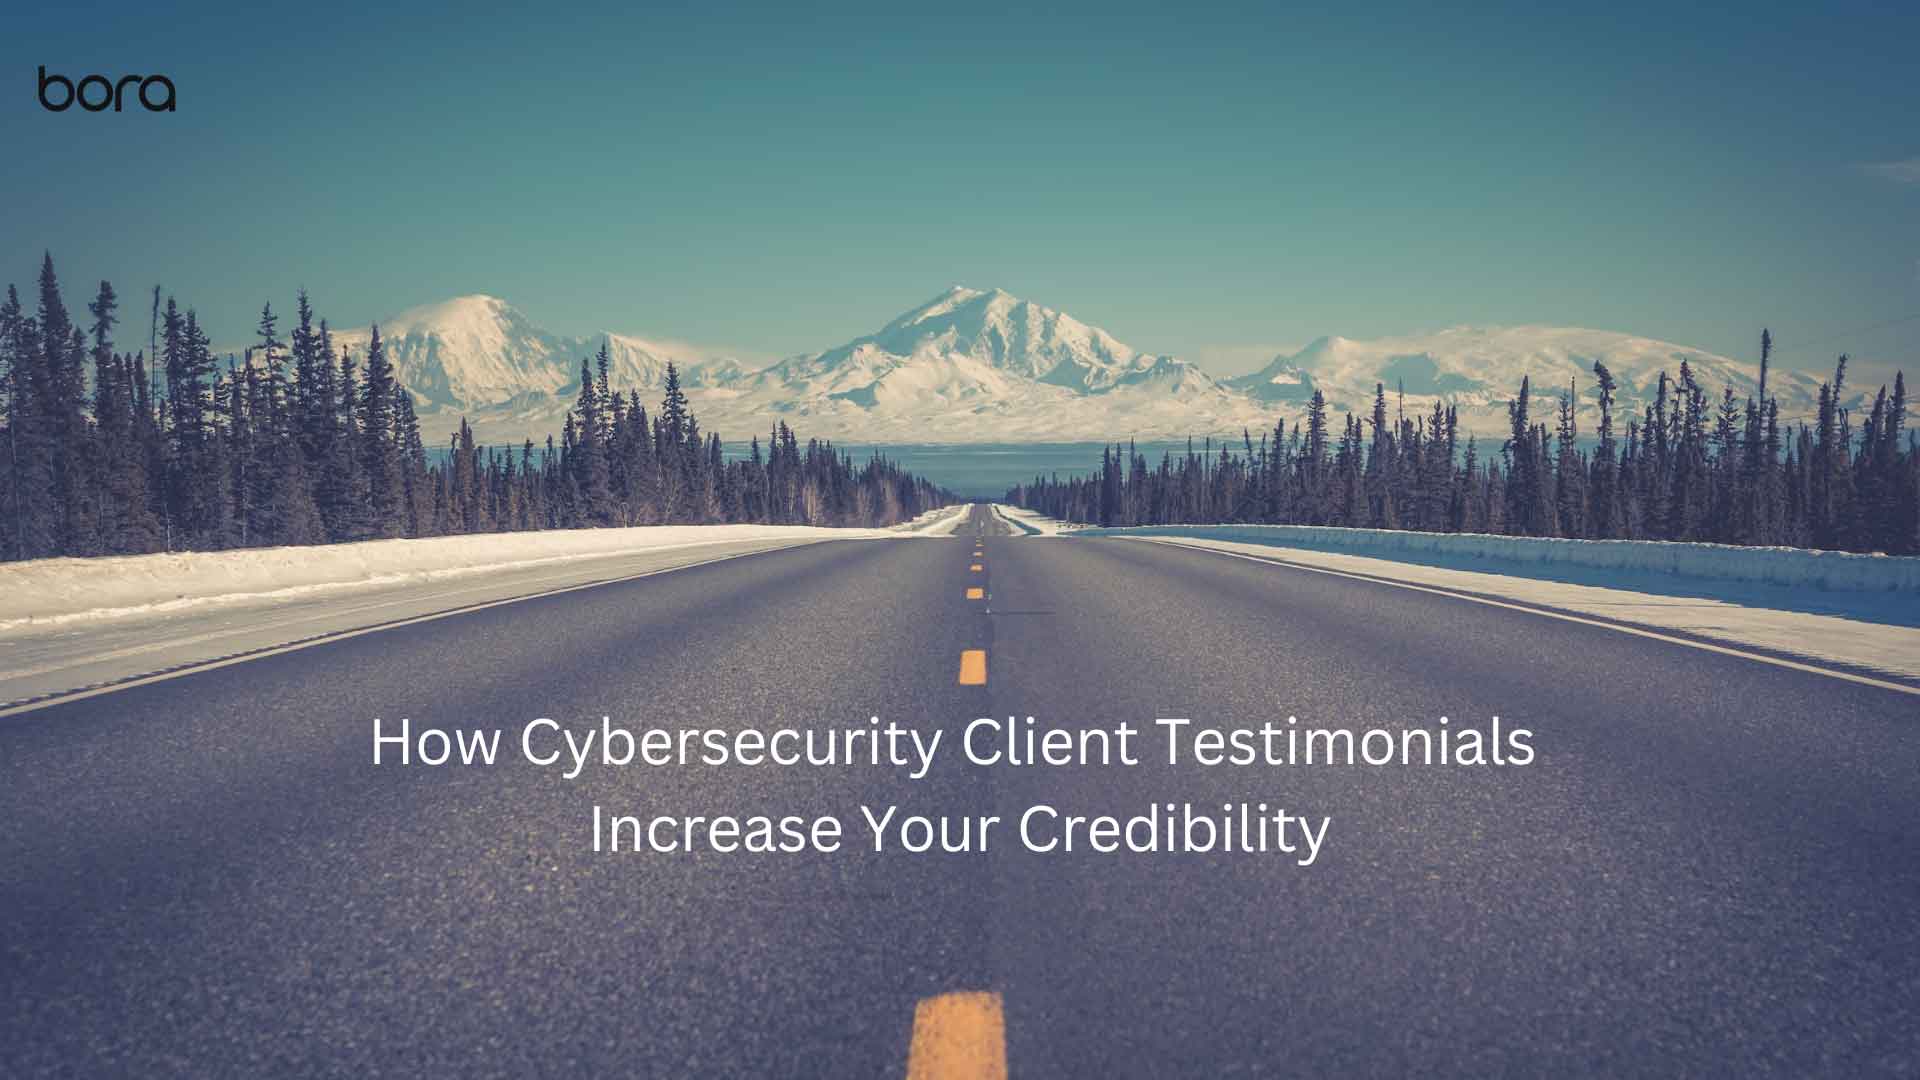 How Cybersecurity Client Testimonials Increase Your Credibility